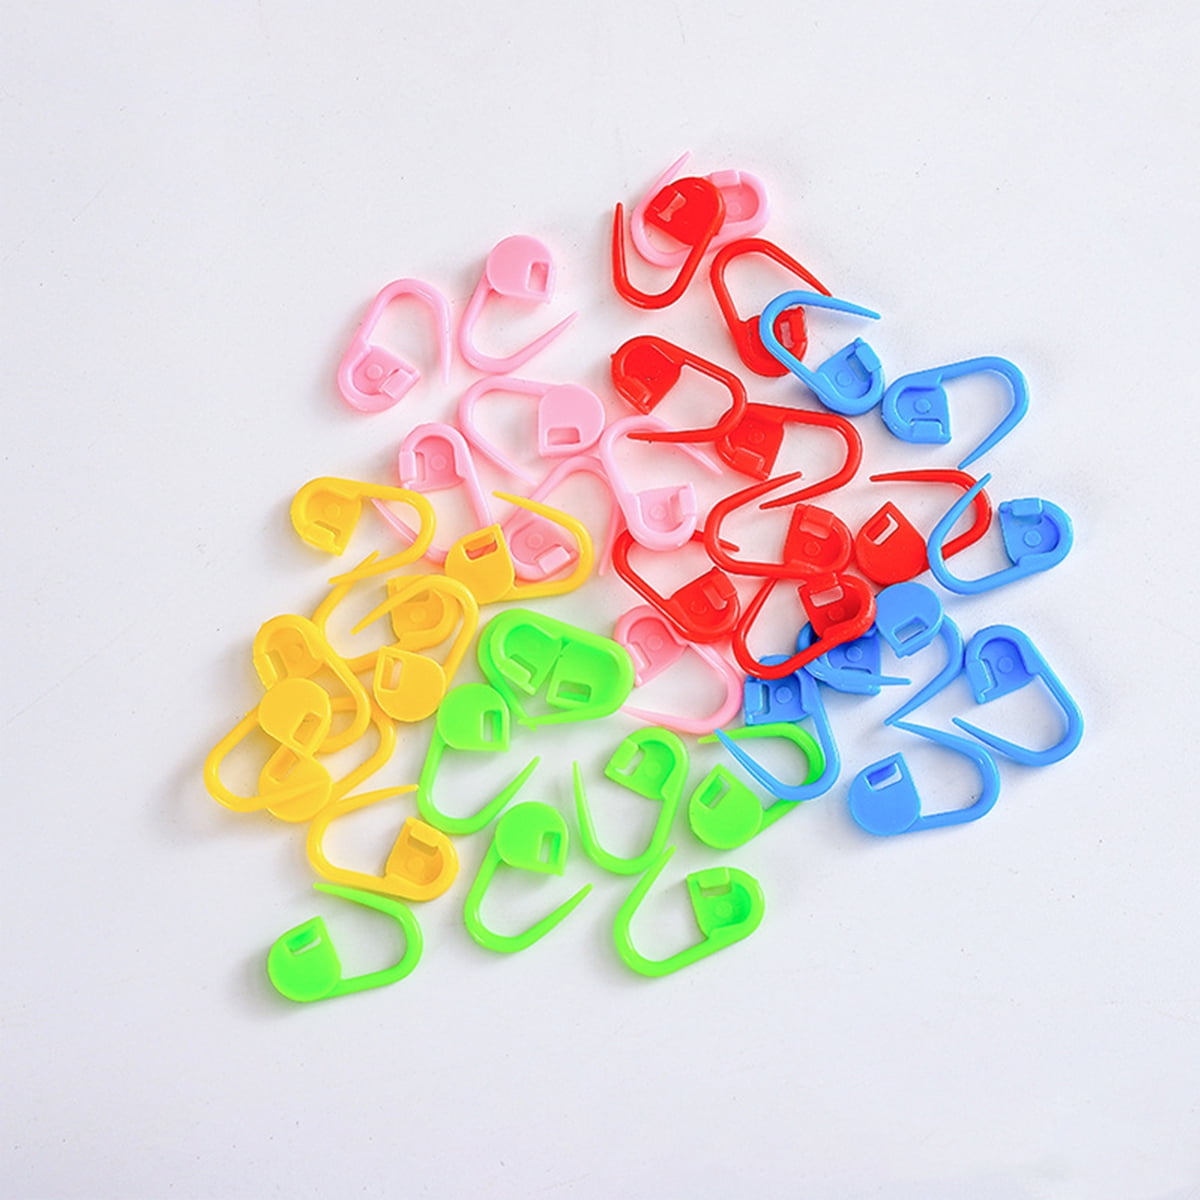 1000Pcs Stitch Markers for Knitting Plastic Colorful Durable Knit